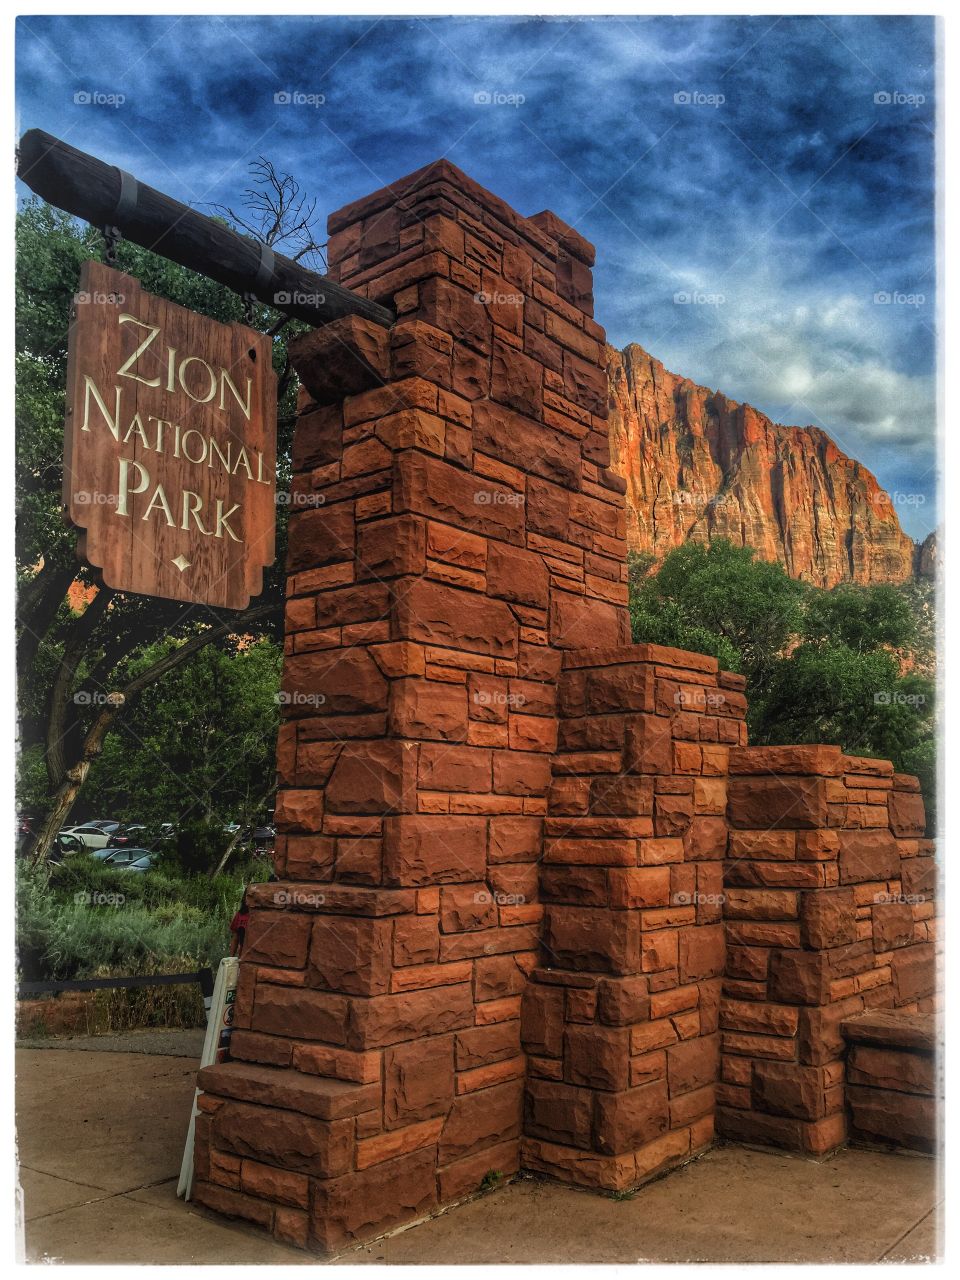 Entrance to Zion
